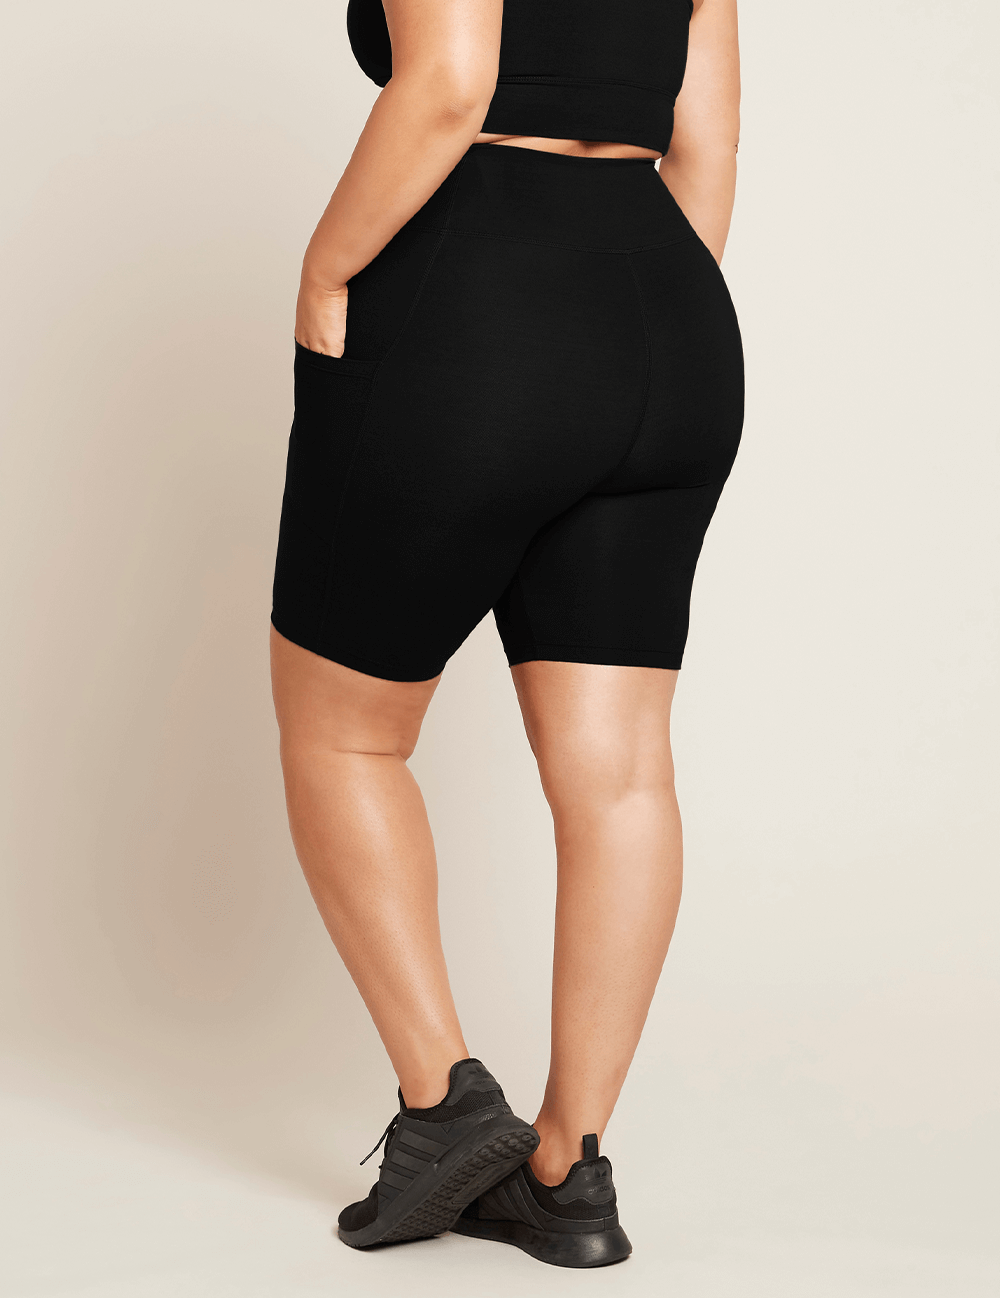 Boody Bamboo Active High-Waisted 8" Short with Pockets in Black Rear View